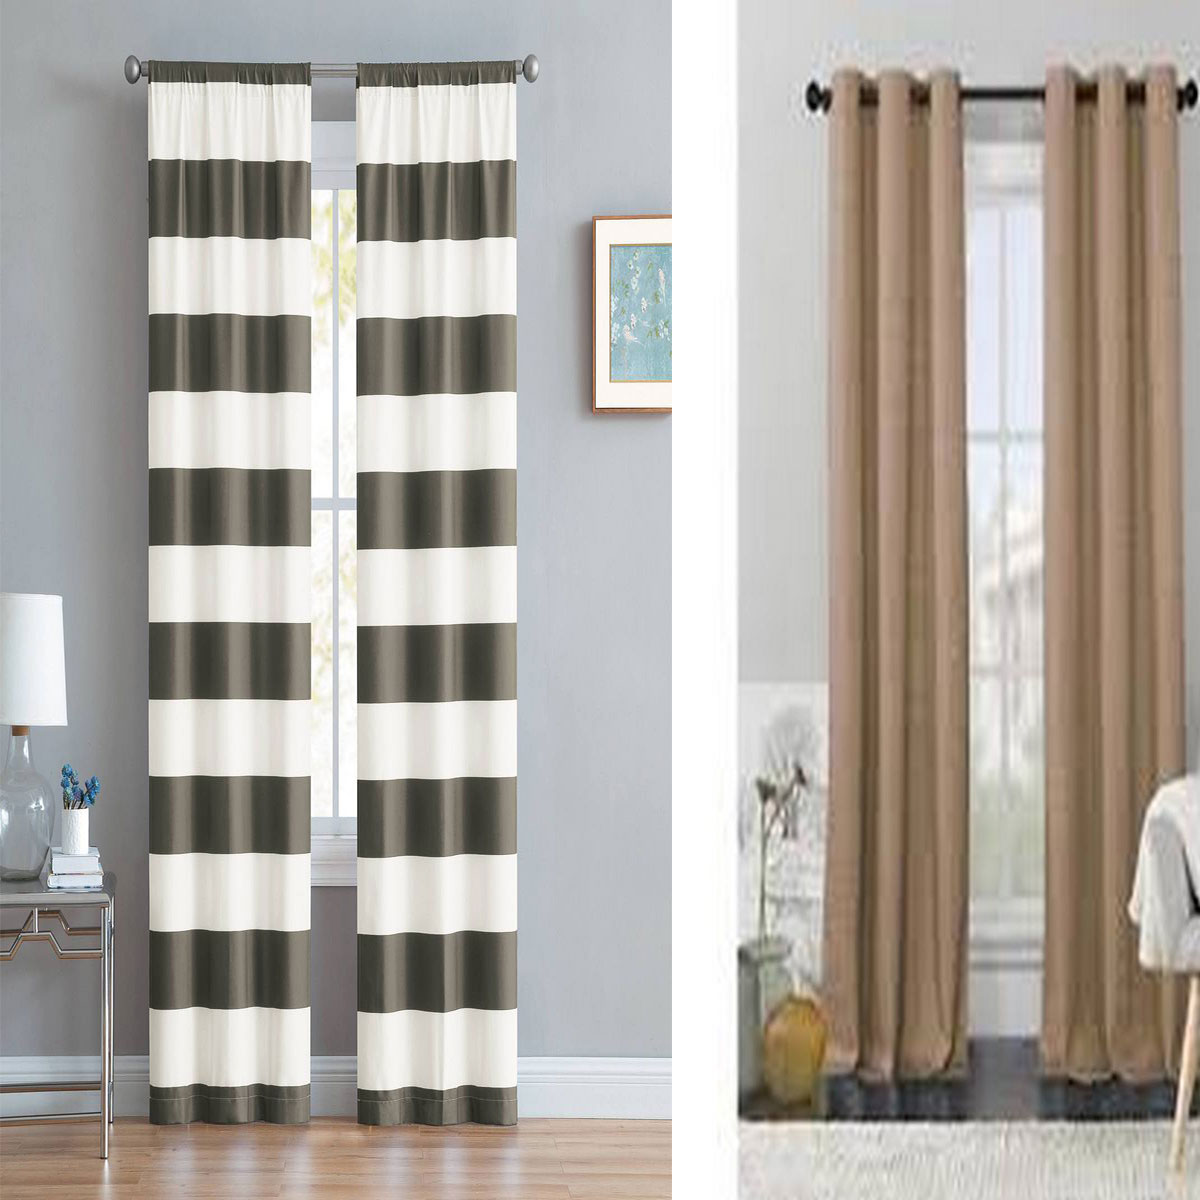 Assorted Kmart Living Room Curtains Cook Brothers